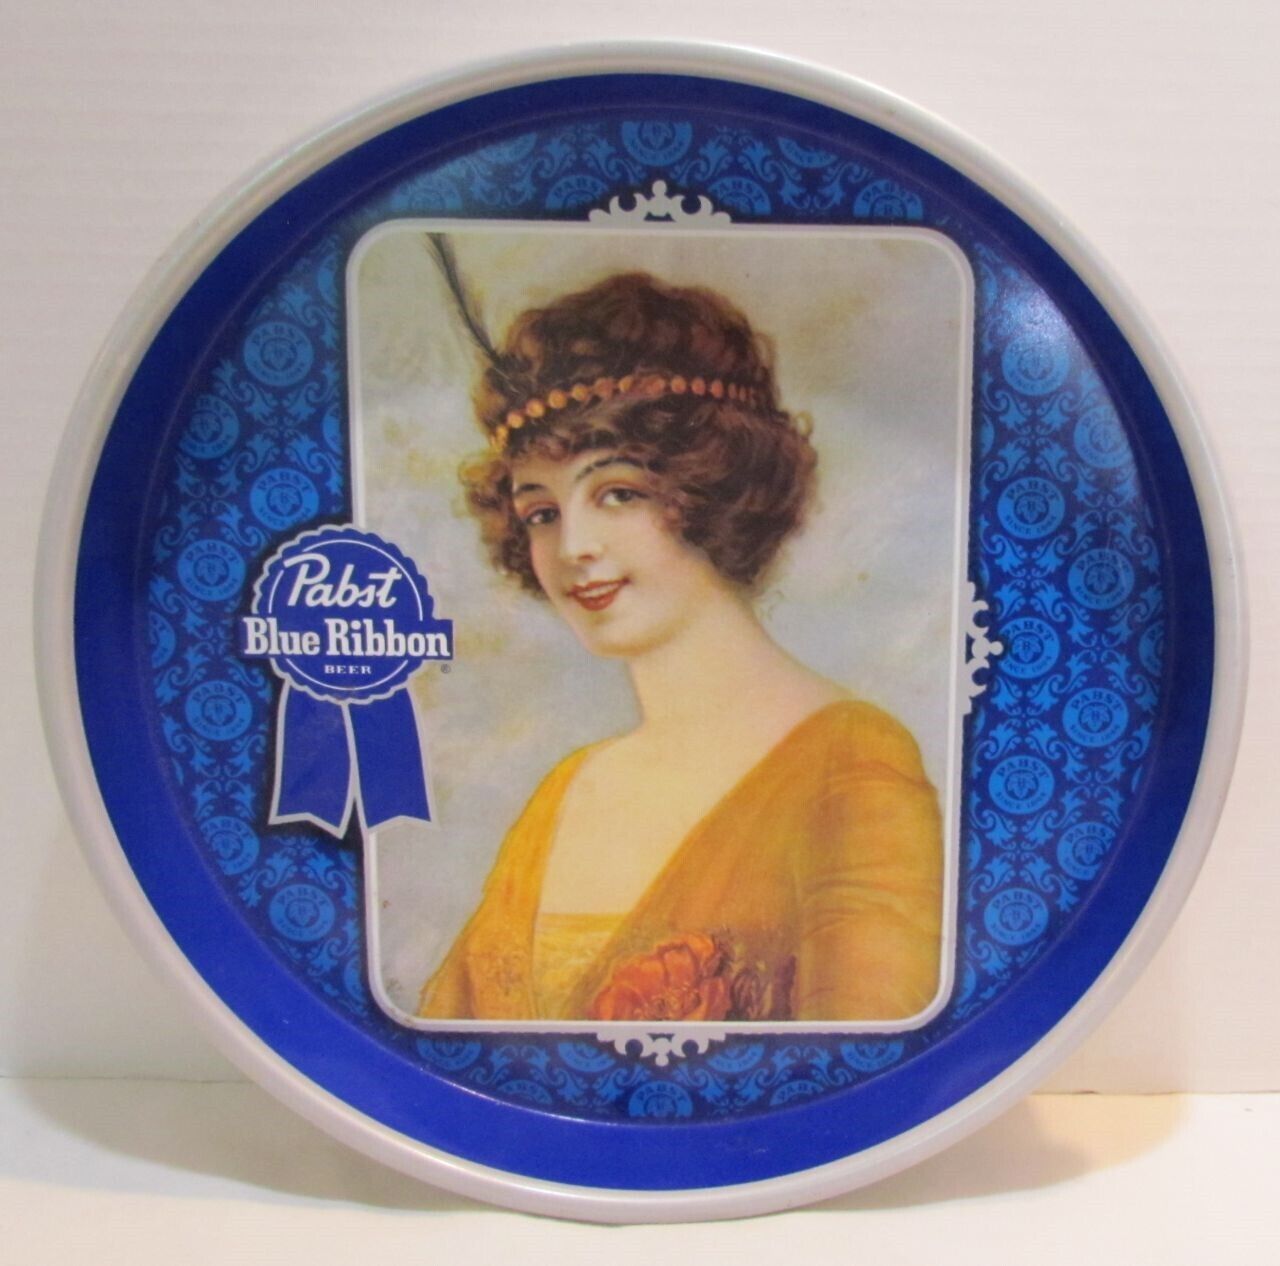 Pabst Blue Ribbon Beer Tray P-1489, 13 inch